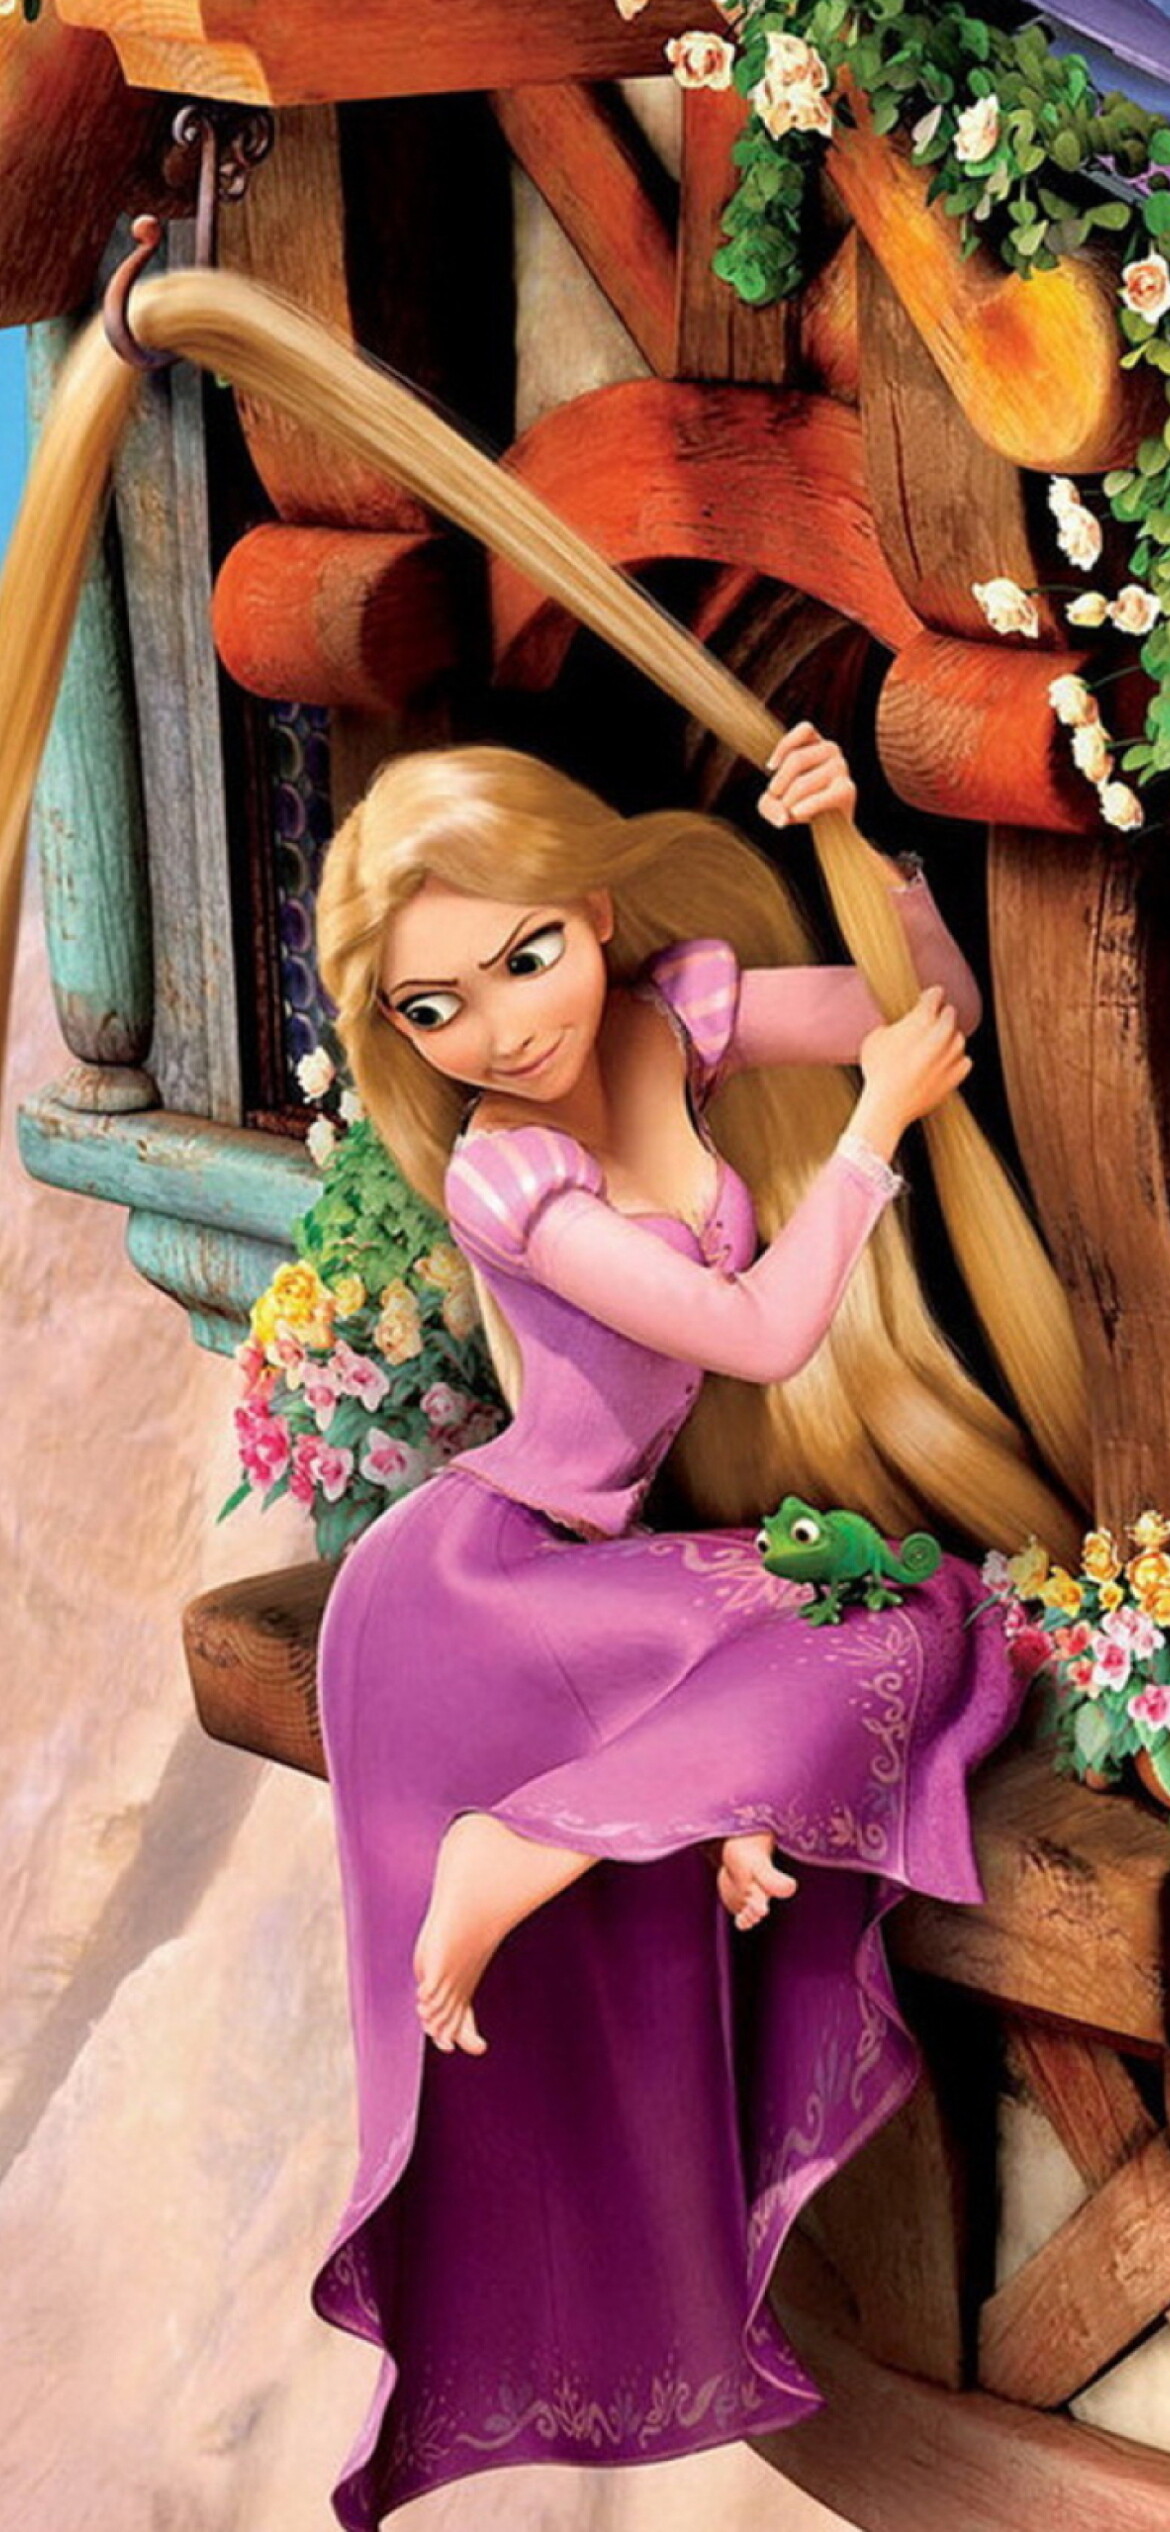 Tangled: The magically long-haired Rapunzel spending her entire life in a tower. 1170x2540 HD Wallpaper.